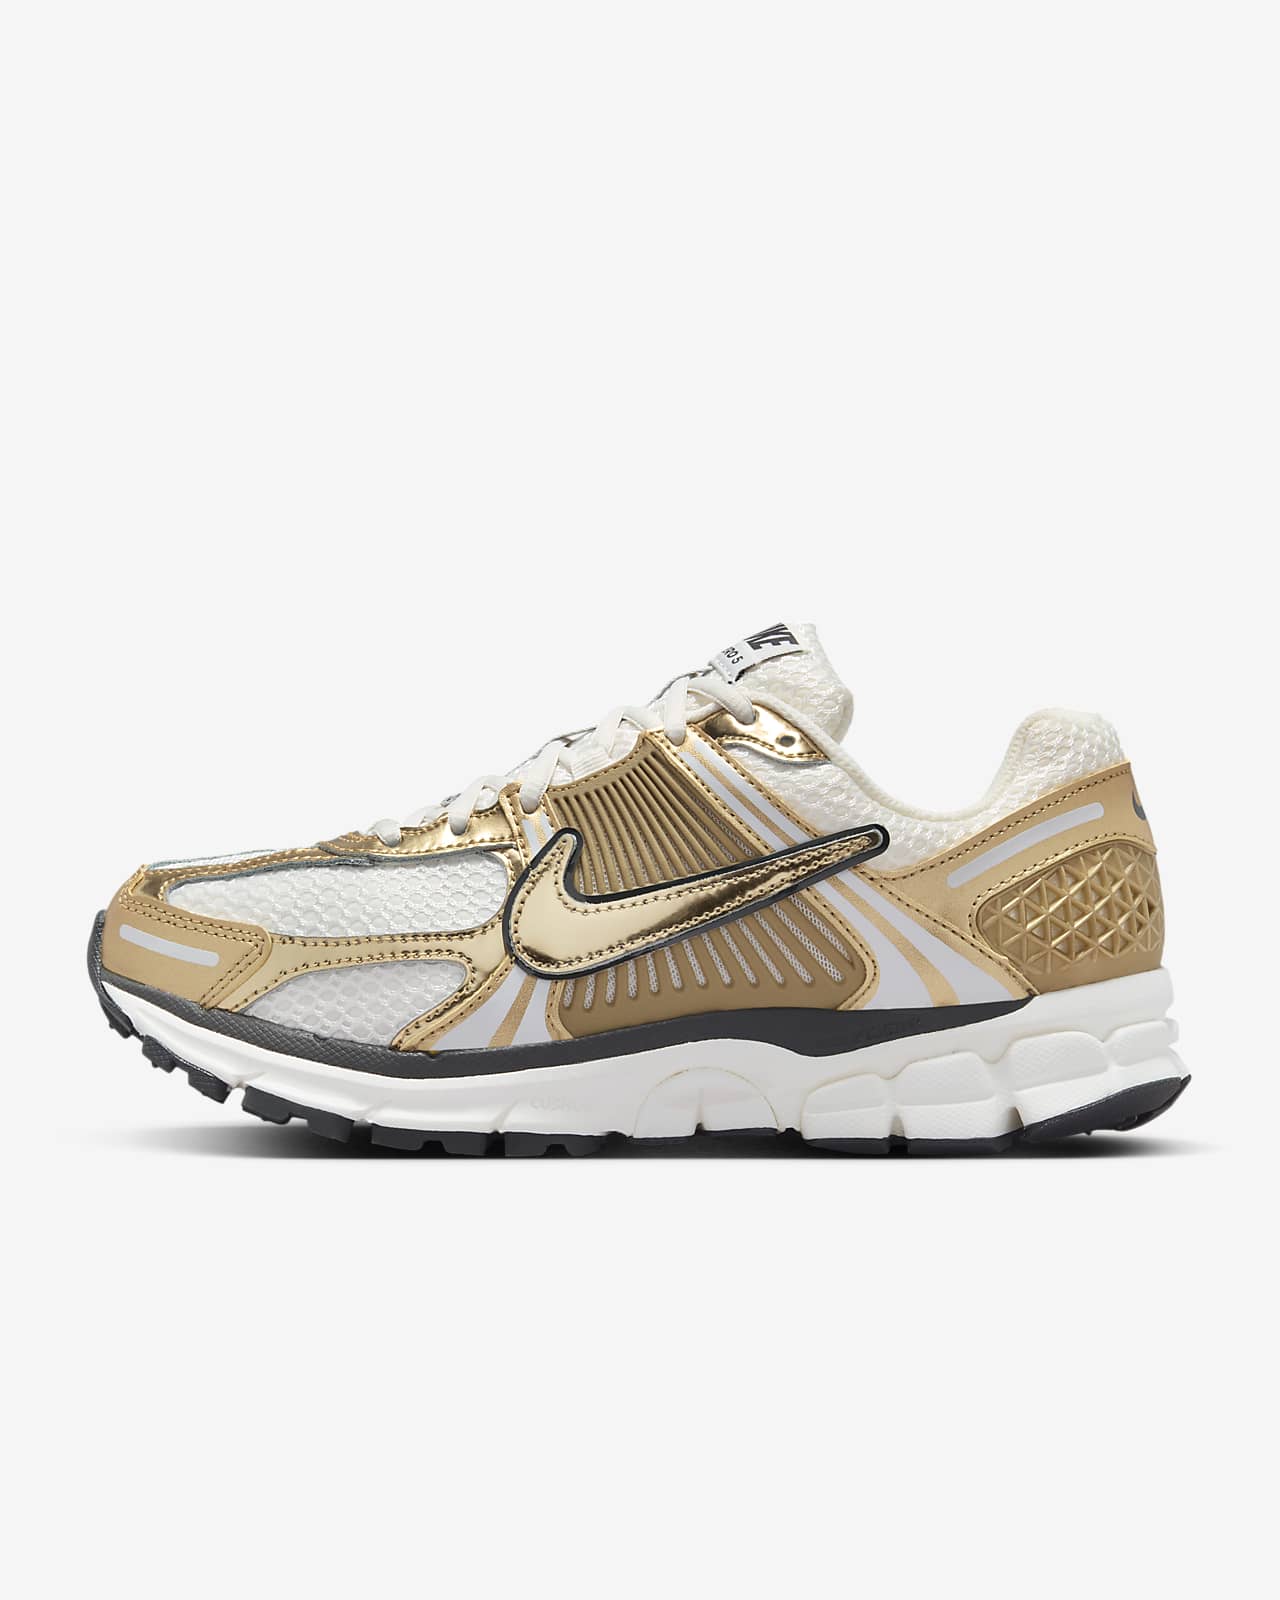 Chaussure Nike Zoom Vomero 5 Gold pour femme